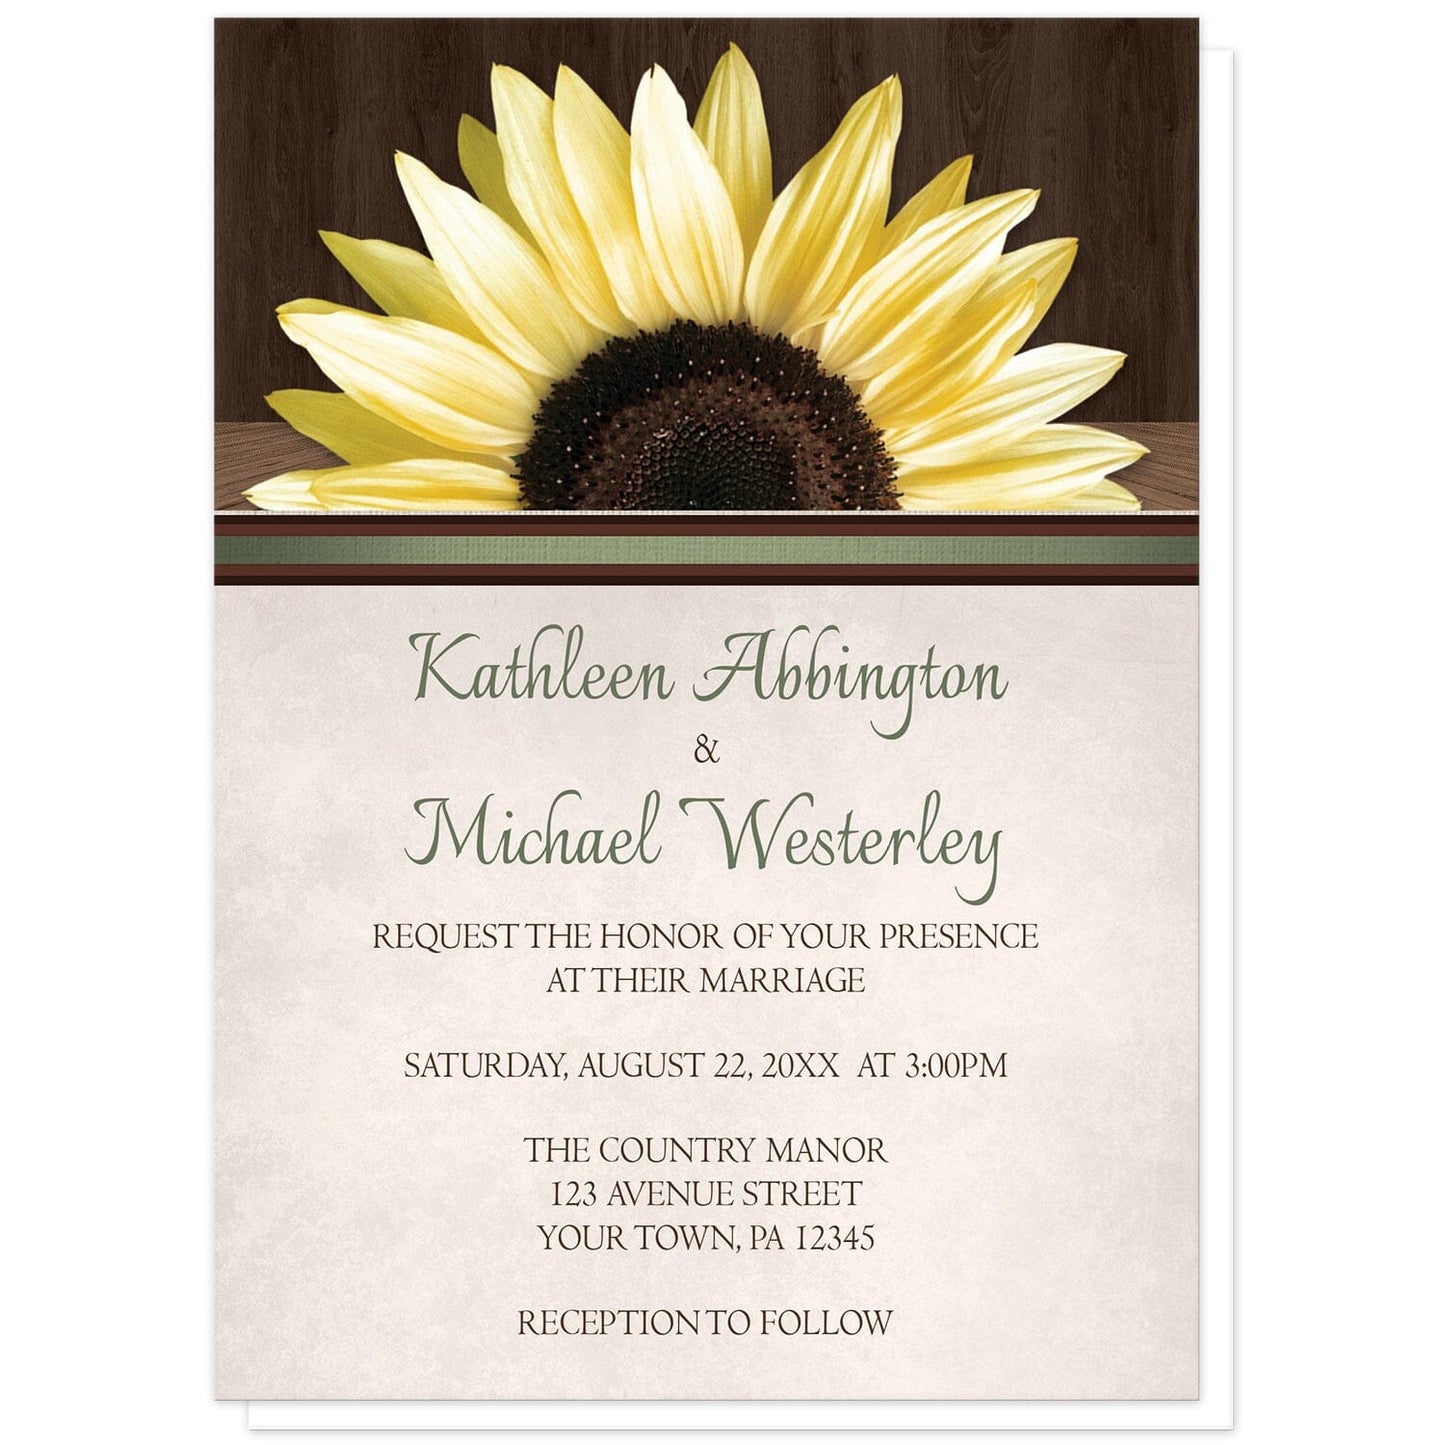 Country Sunflower Over Wood Rustic Wedding Invitations at Artistically Invited. Country sunflower over wood rustic wedding invitations with a lovely big yellow sunflower over a rustic dark brown wood pattern along the top above a beige parchment background illustration. Your personalized marriage celebration details are elegantly printed in green and brown below the sunflower. 